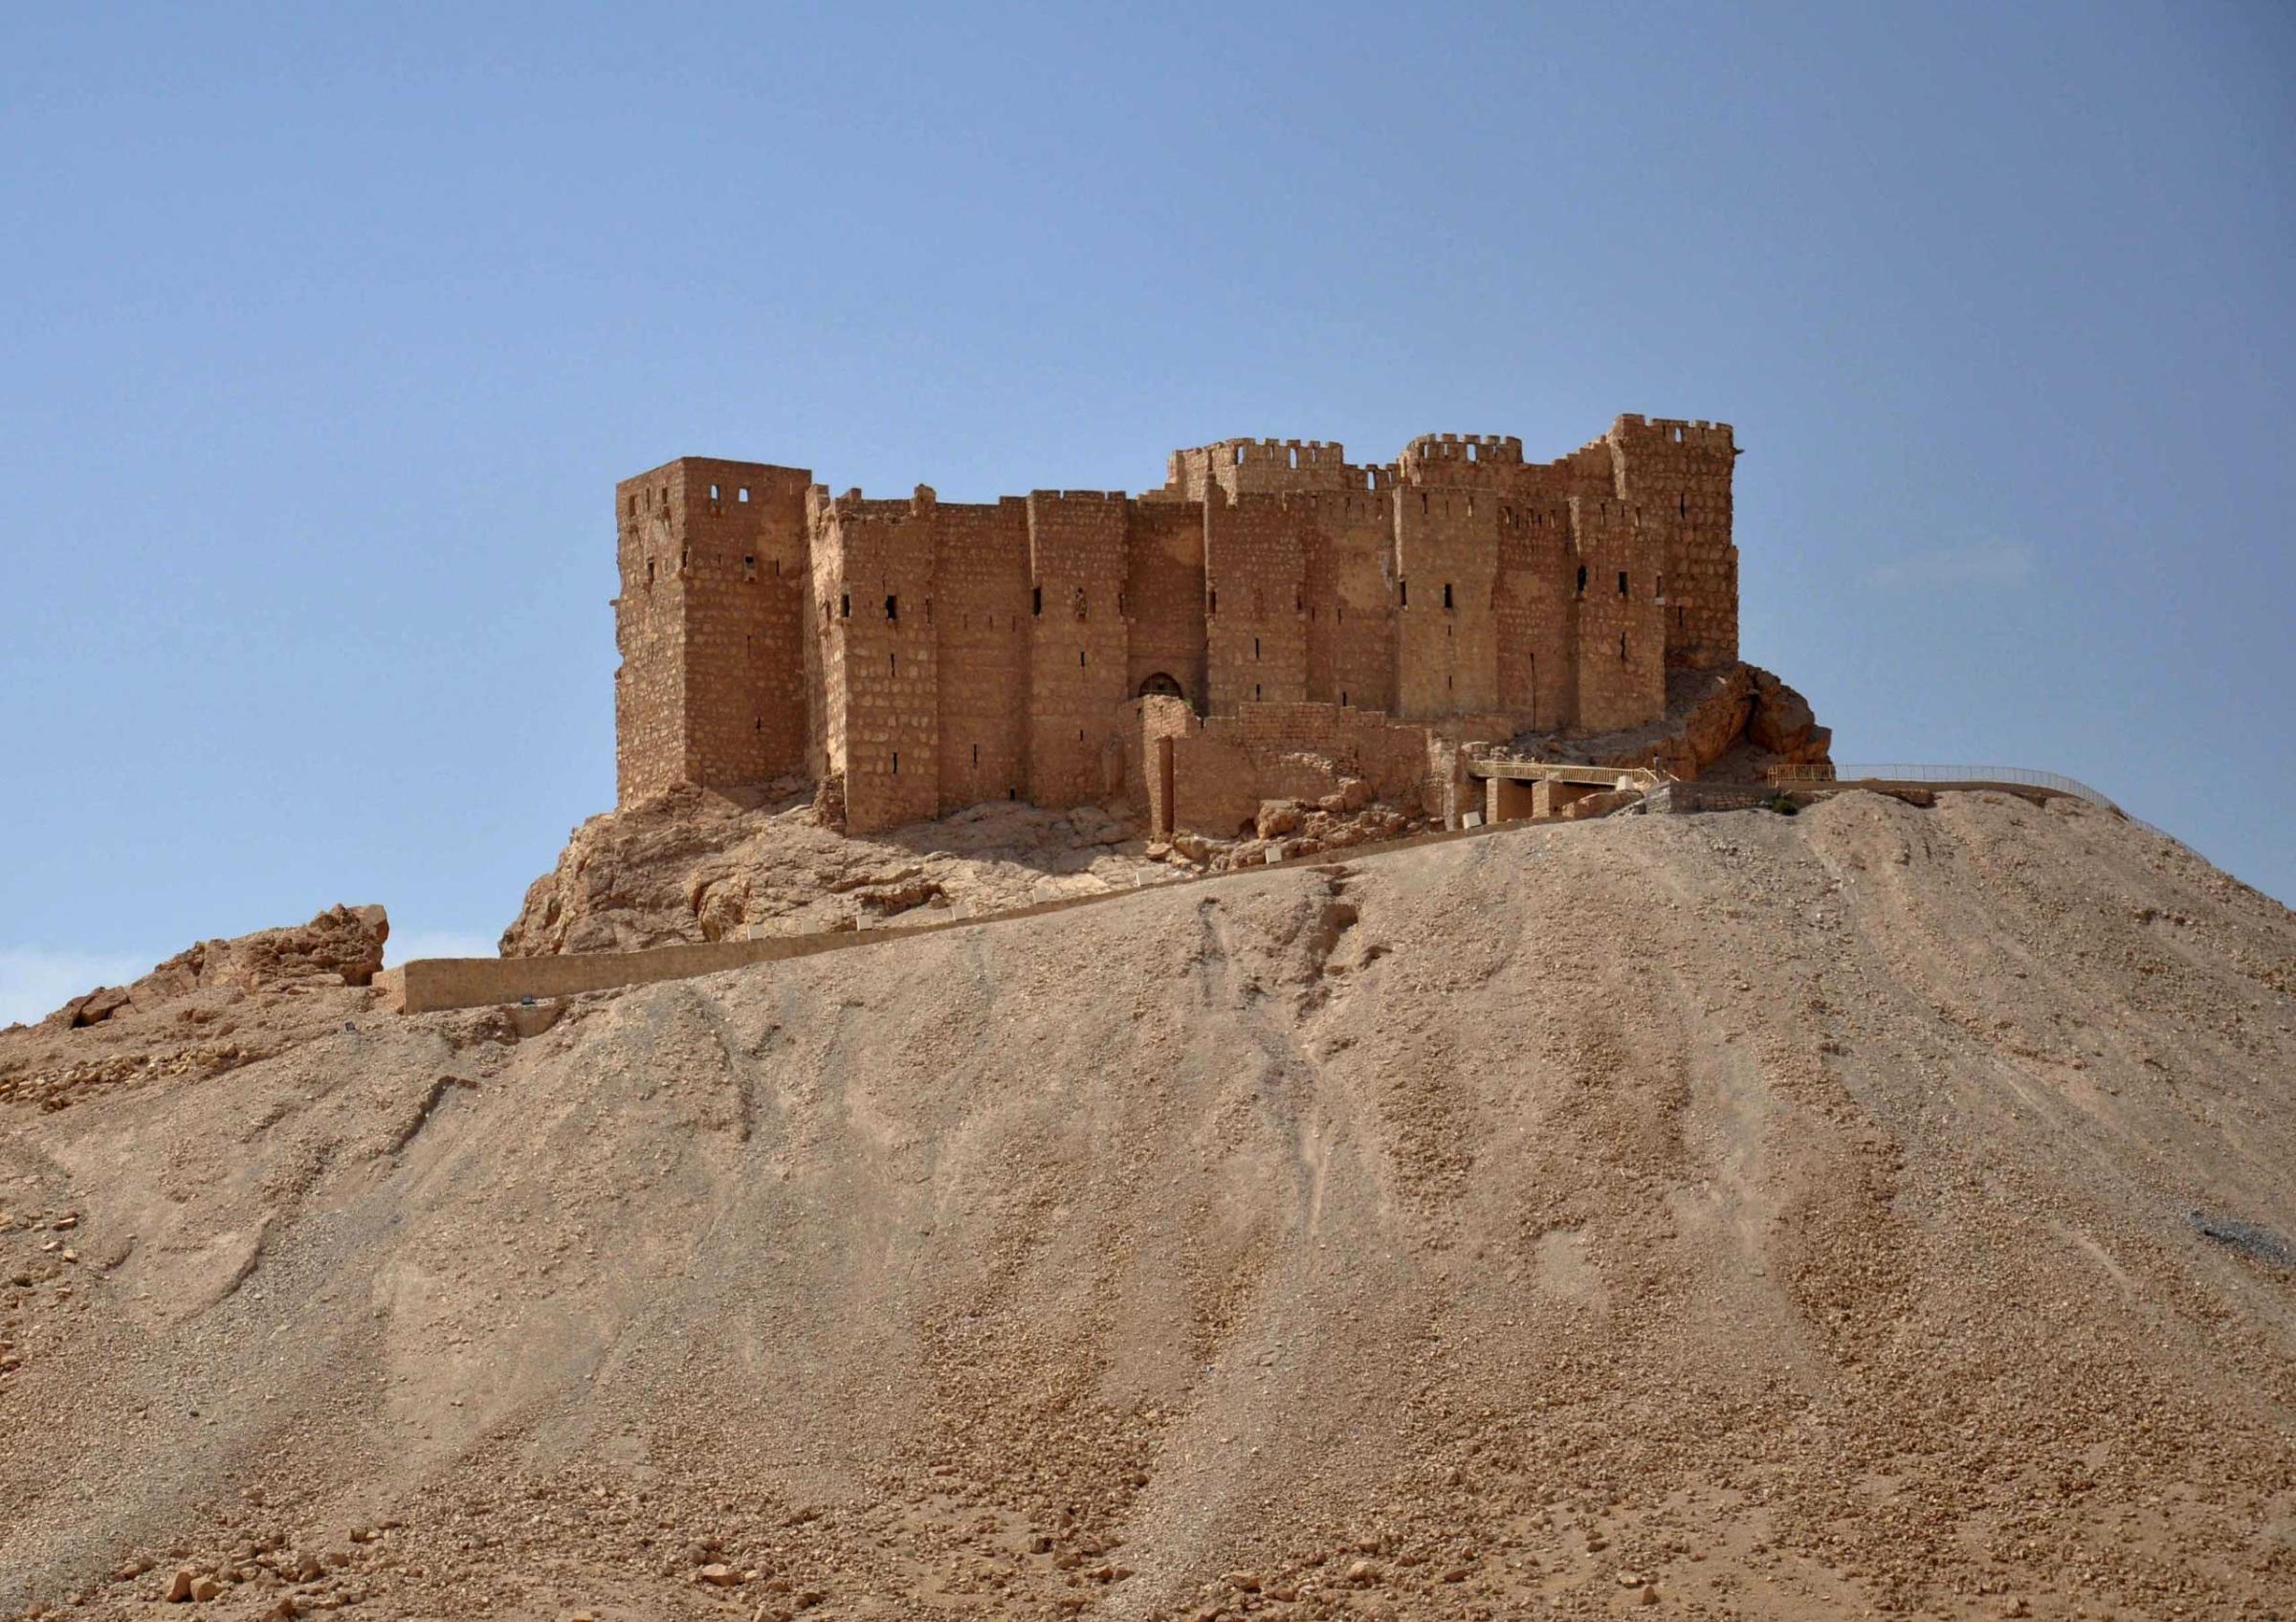 The castle of the ancient Syrian city of Palmyra on May 18, 2015, a day after ISIS militants fired rockets into the city and killing five people.